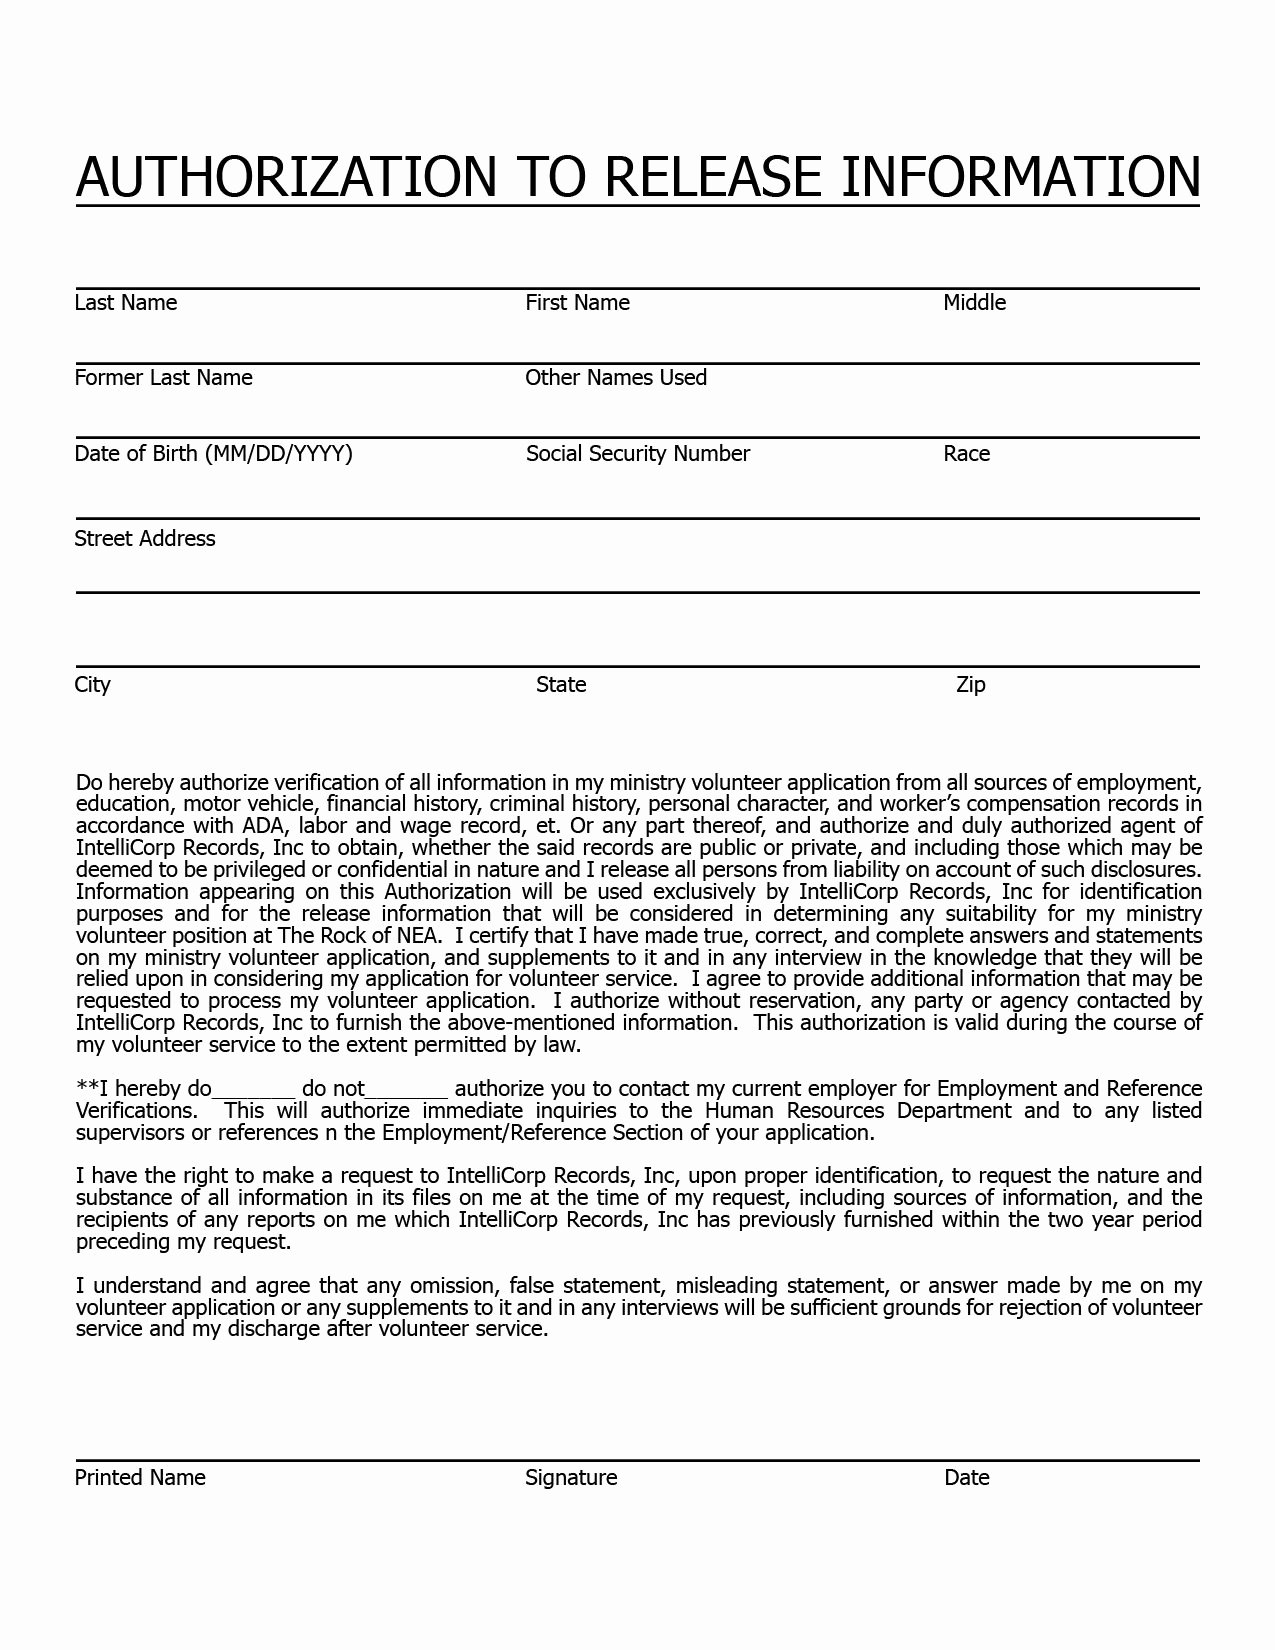 Background Check form Template Free Fresh Church Nursery Check In forms thenurseries